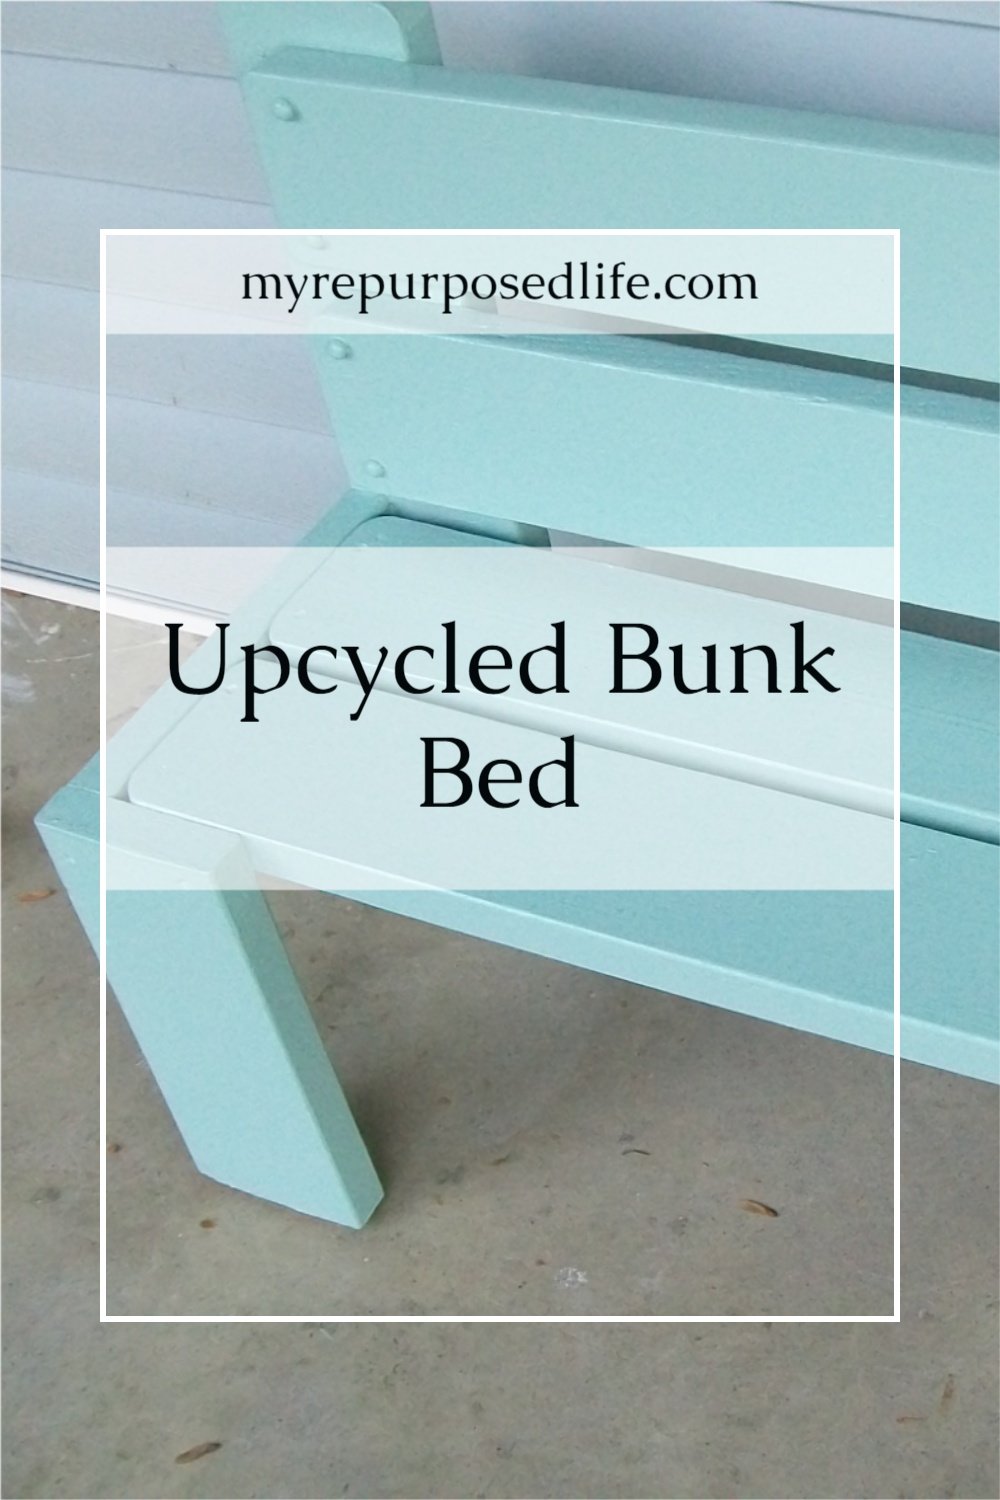 How to make a park like bench out of an upcycled bunk bed. An unusual bunk bed makes a chunky and very sturdy bench for the kids. #MyRepurposedLife #repurposed #upcycle #bunkbed #bench #diy #furniture via @repurposedlife